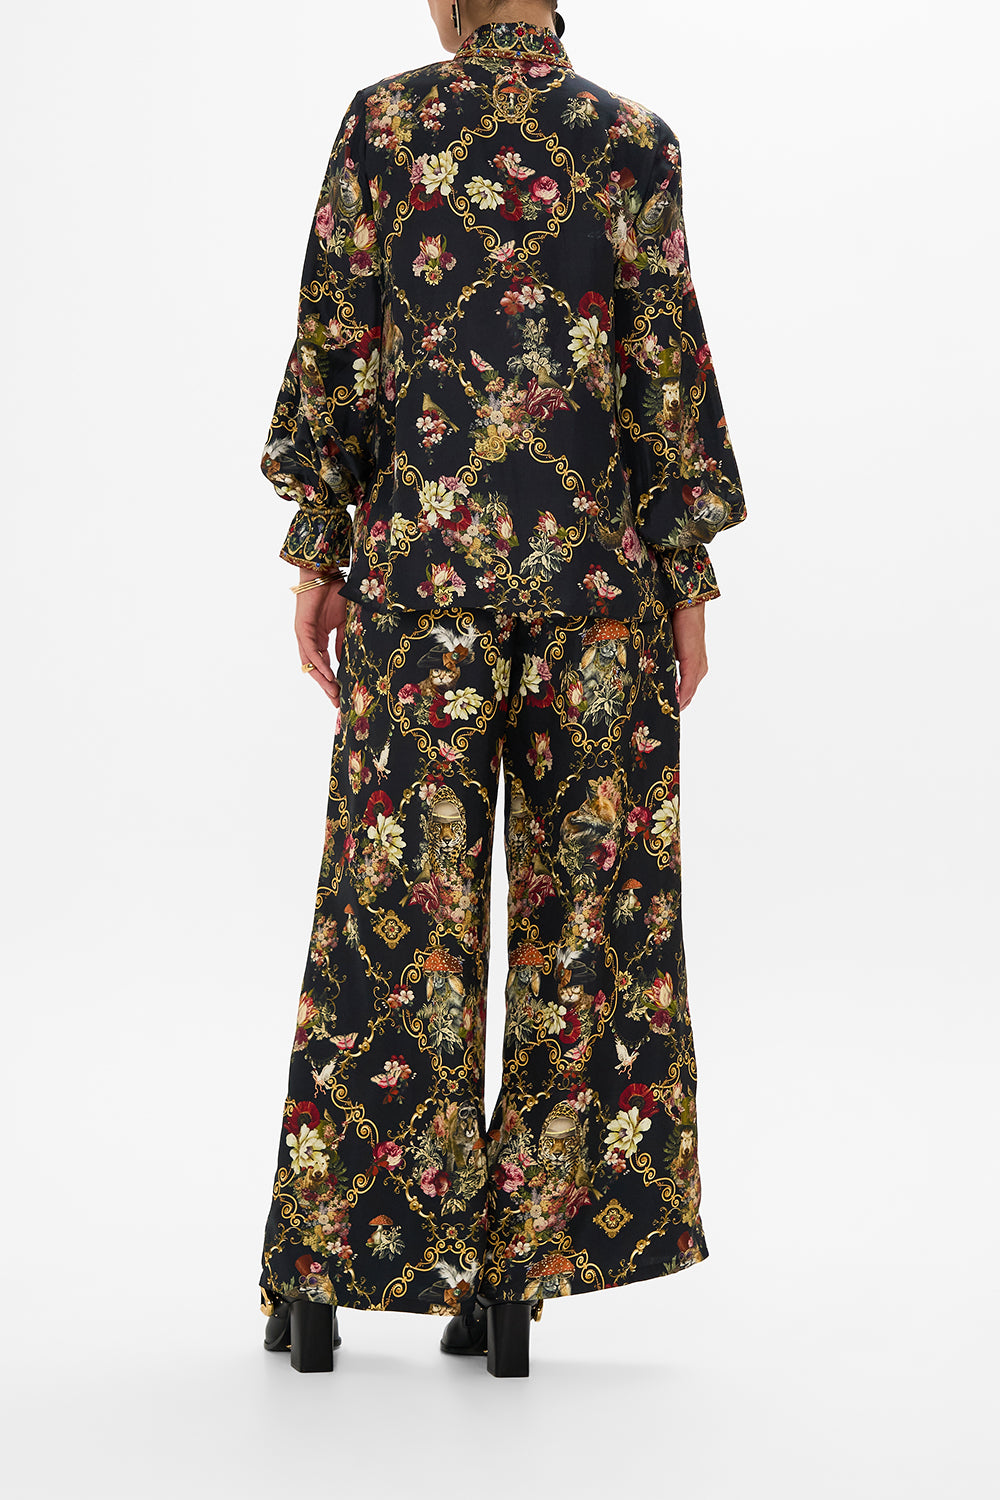 CAMILLA Floral Curved Collar Blouse with Pockets in Told in the Tapestry